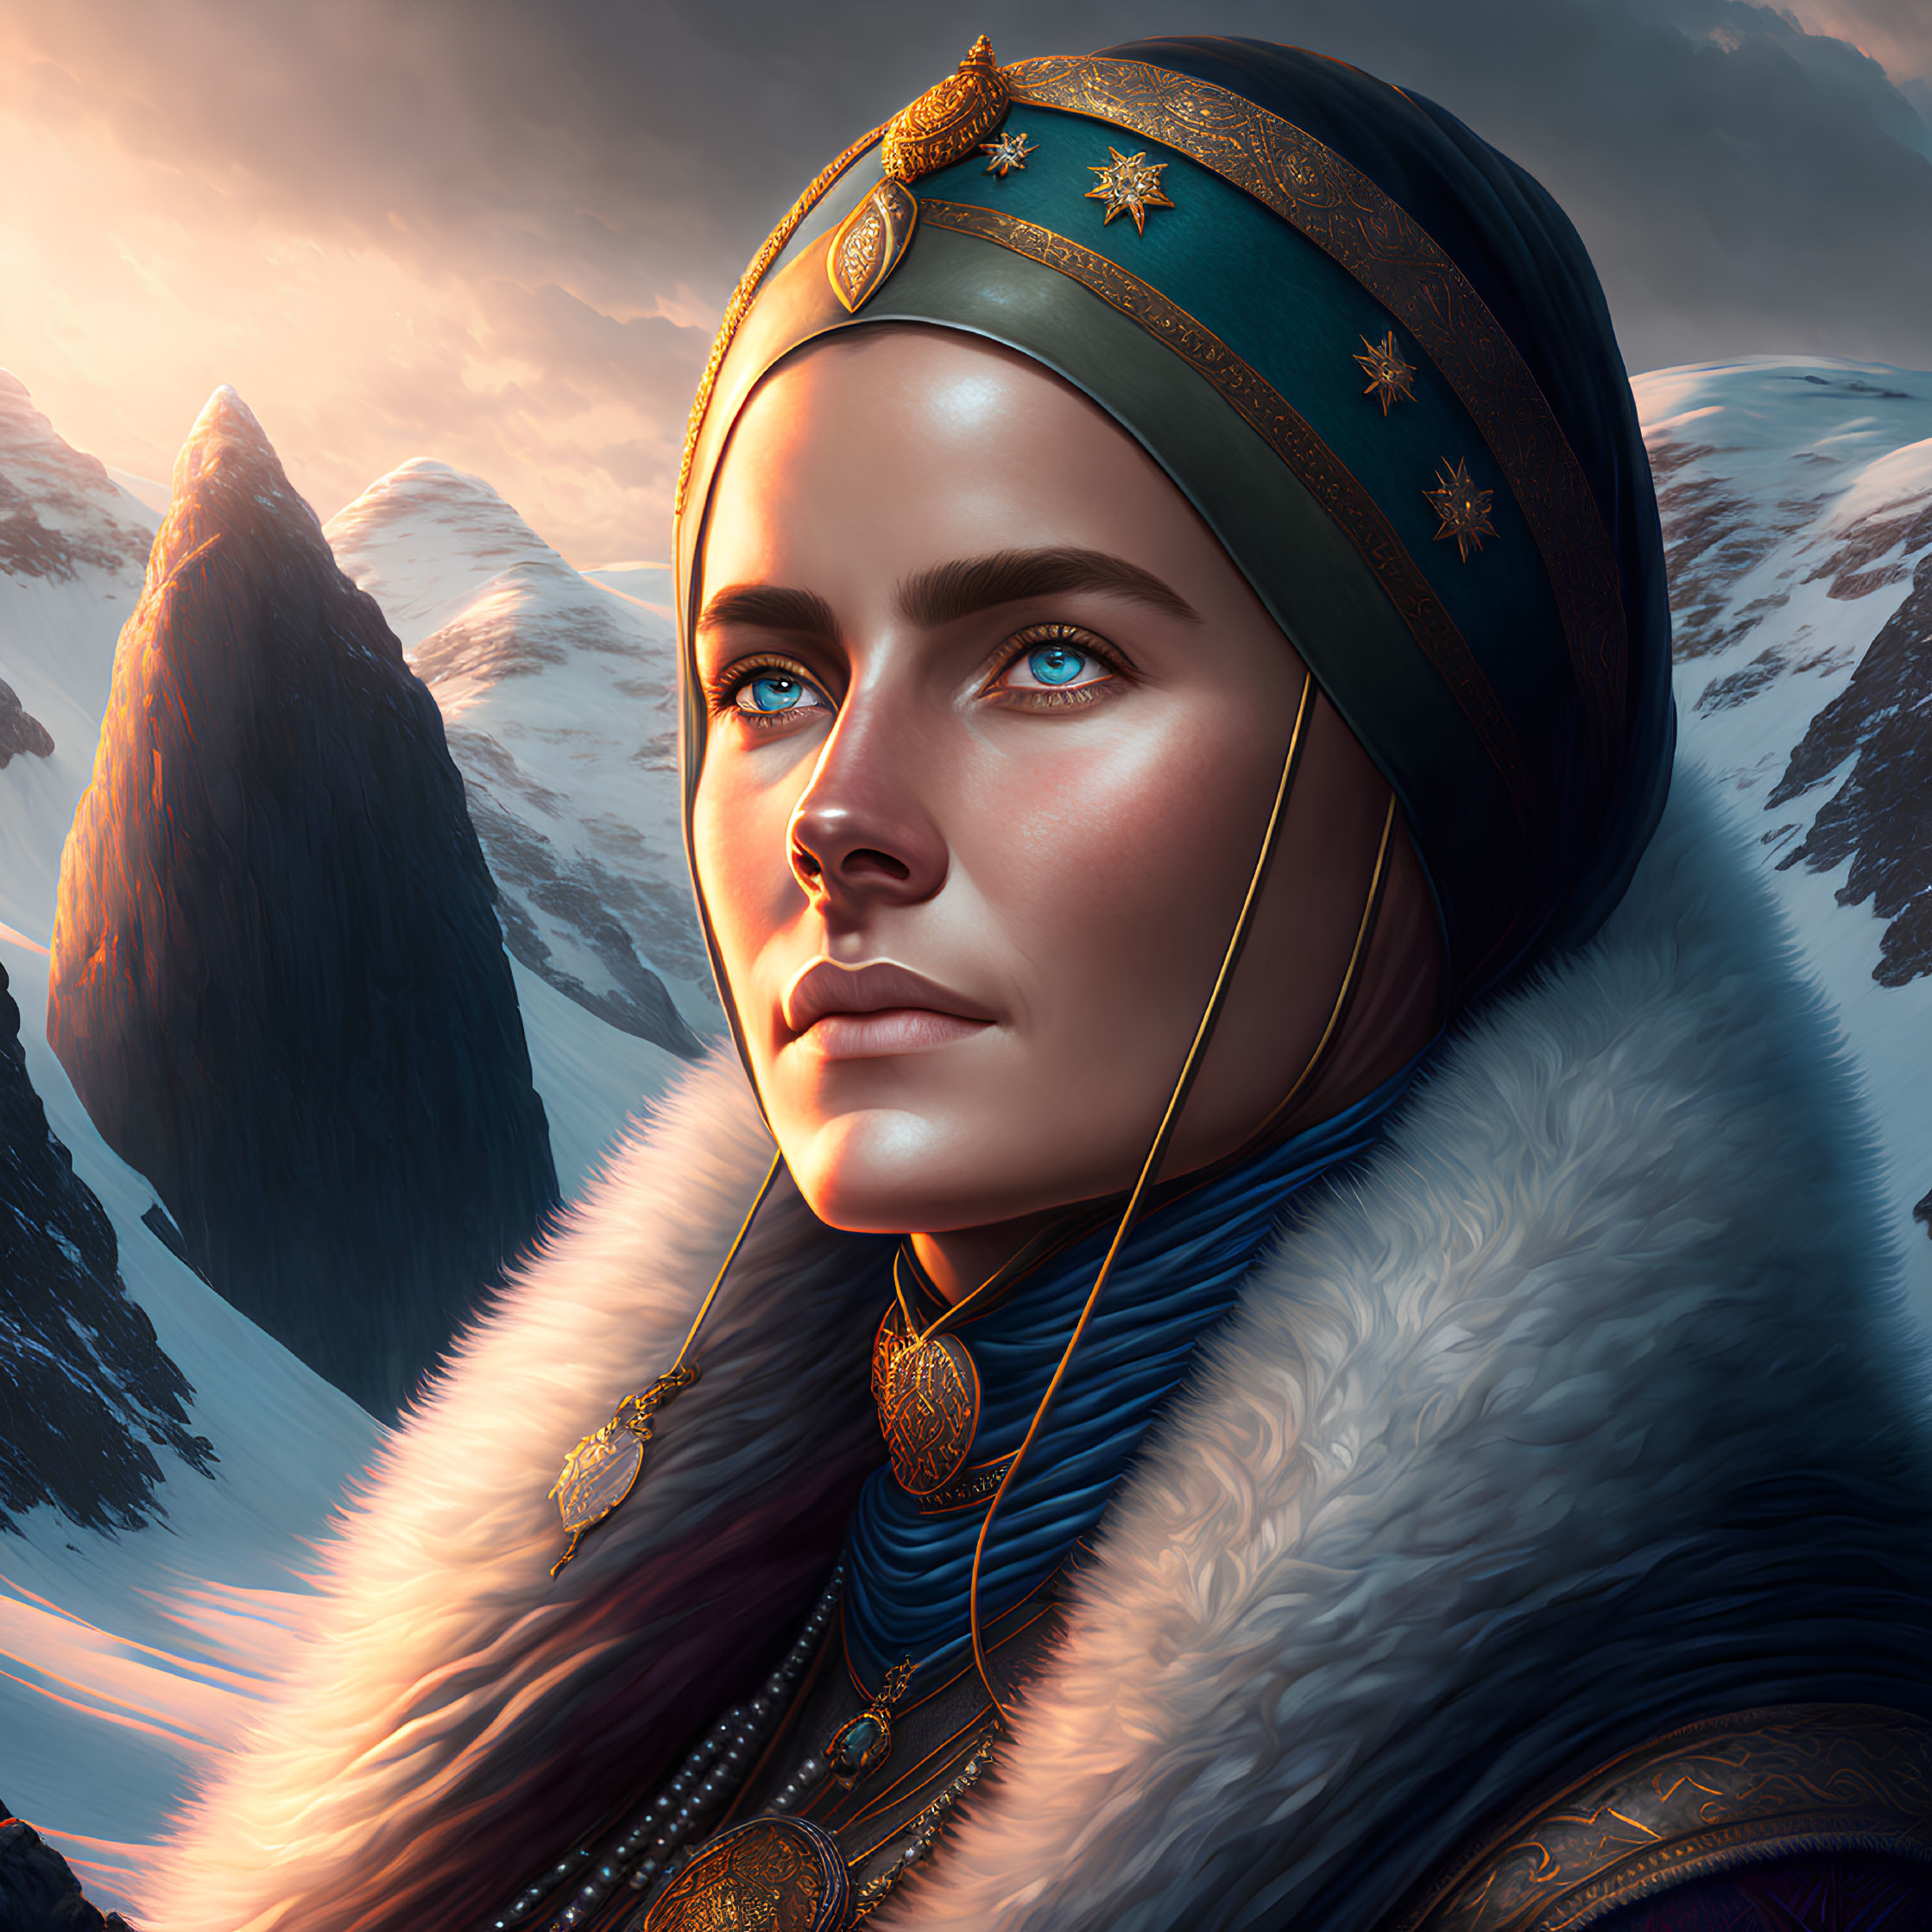 Detailed digital portrait of a woman with blue eyes, ornate headgear, fur, and mountain backdrop